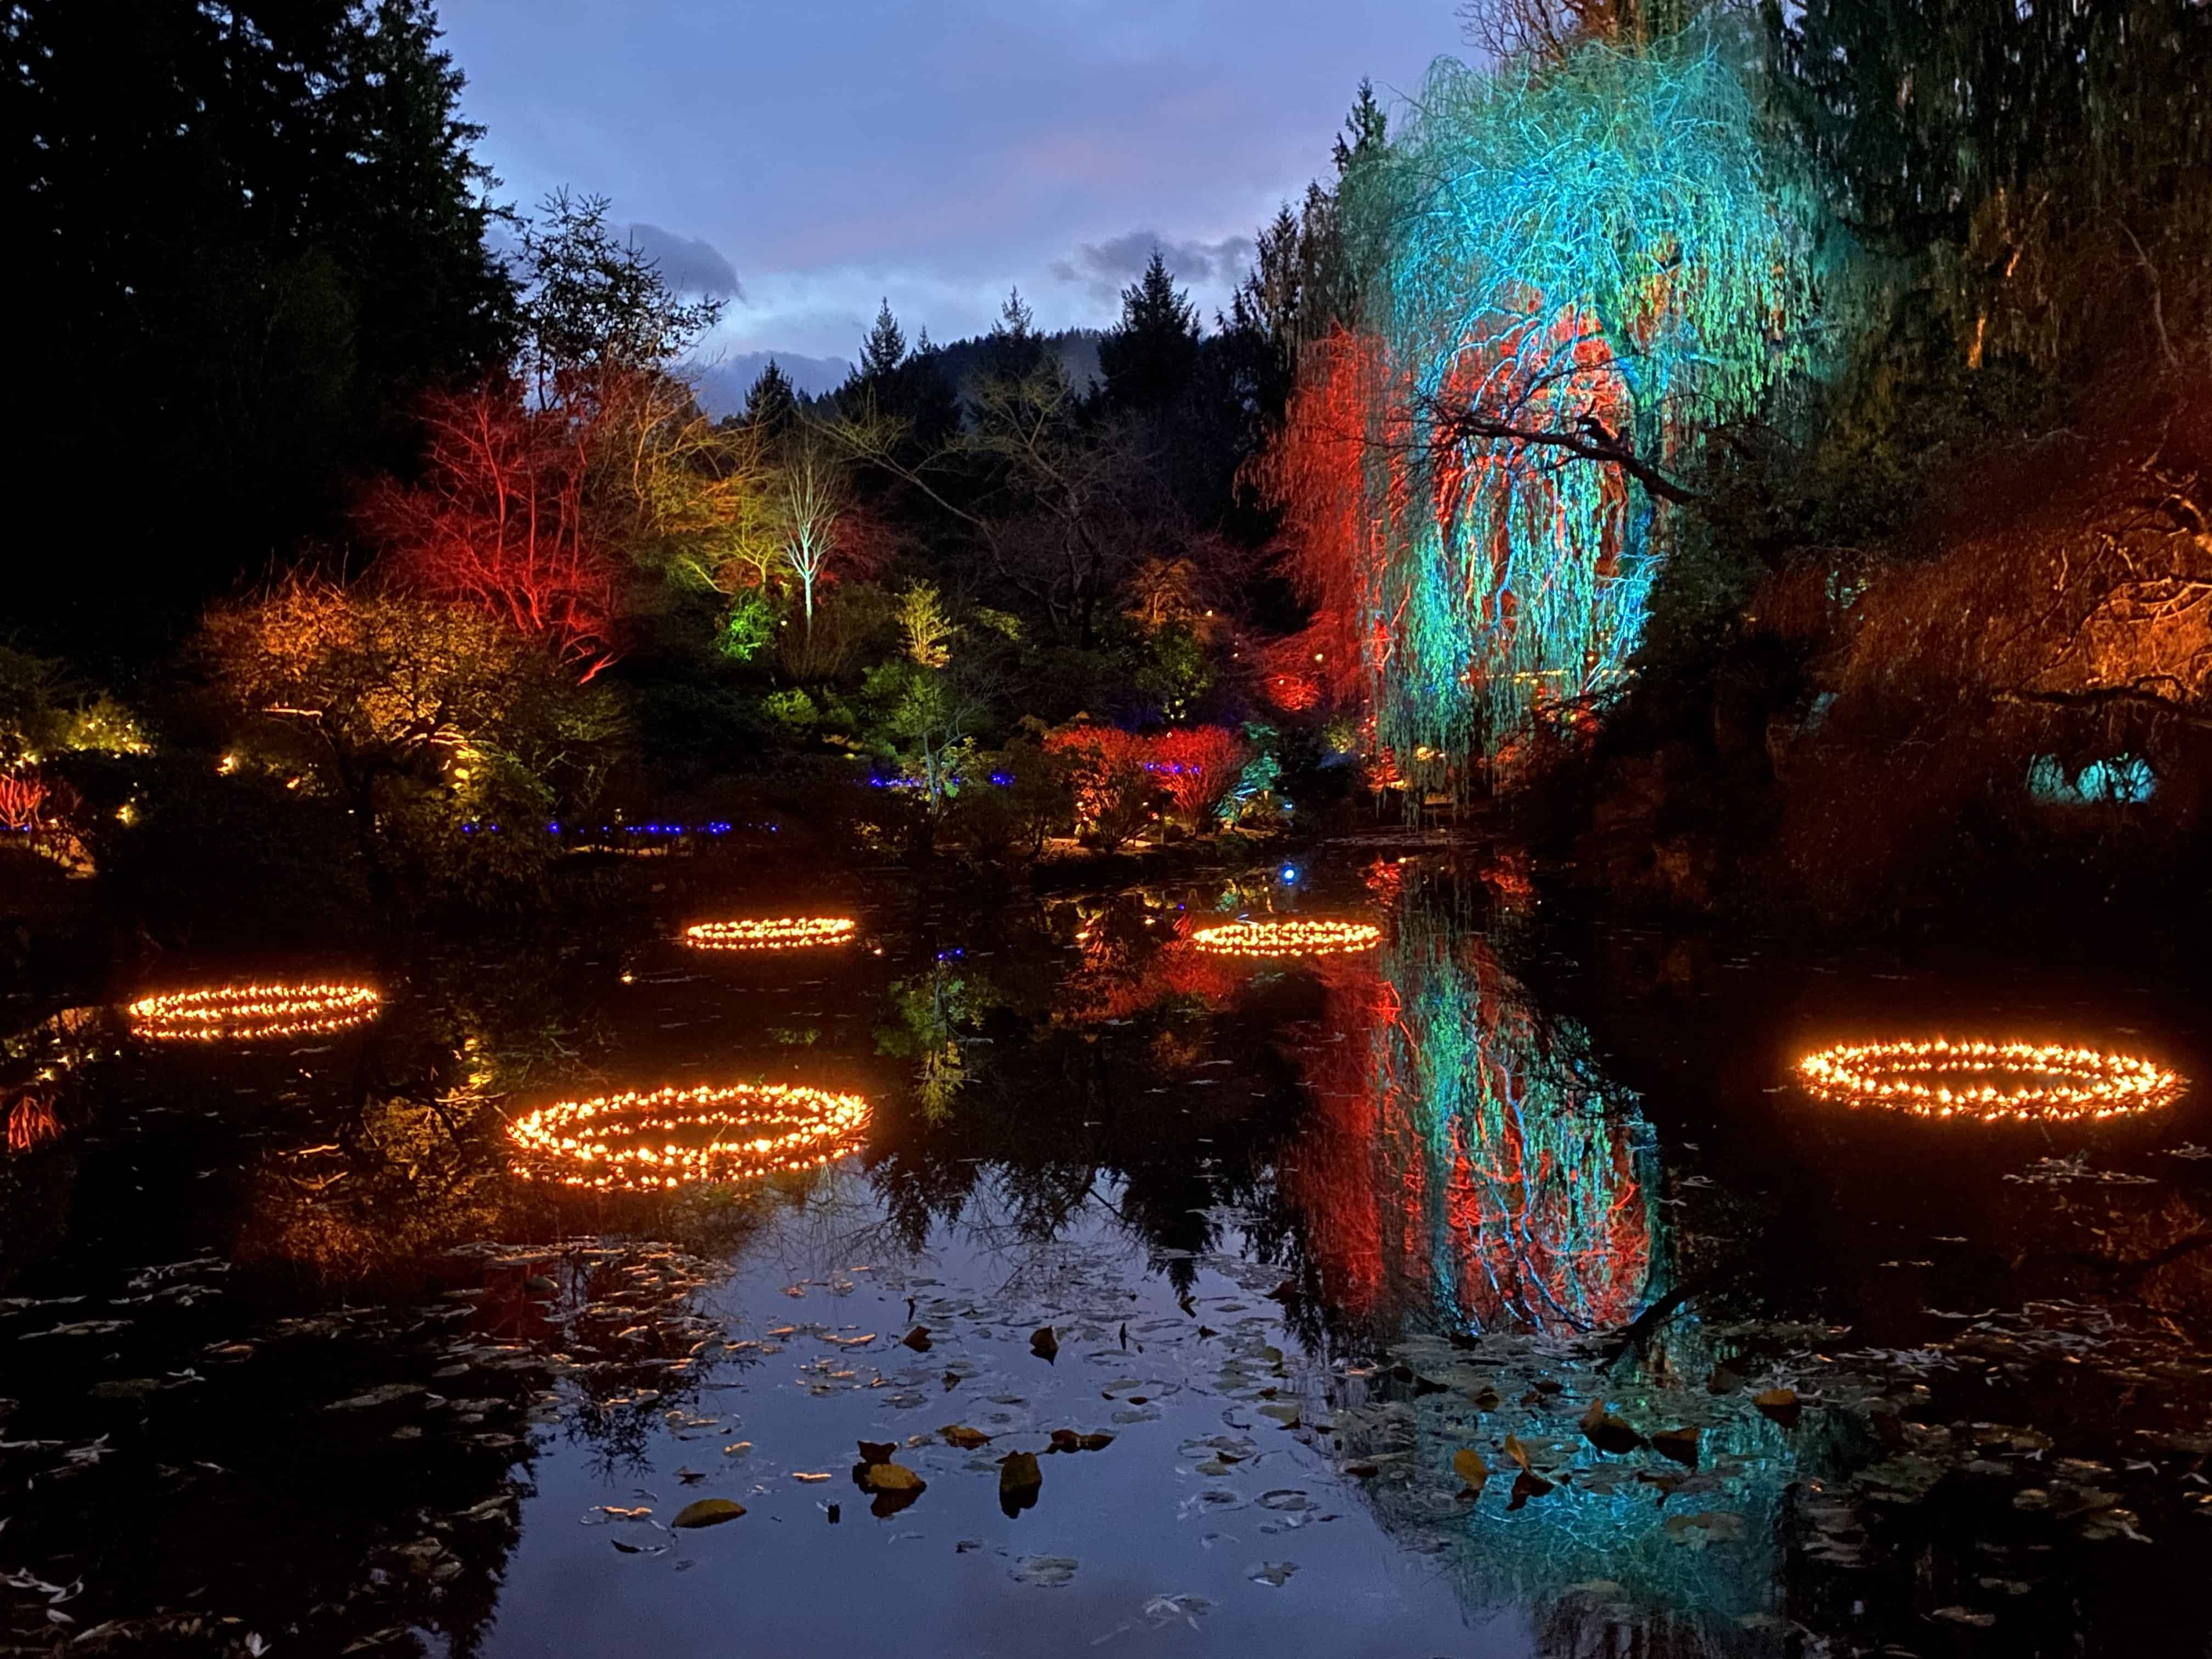 The five golden rings display from the "12 days of Christmas" at Butchart Gardens.